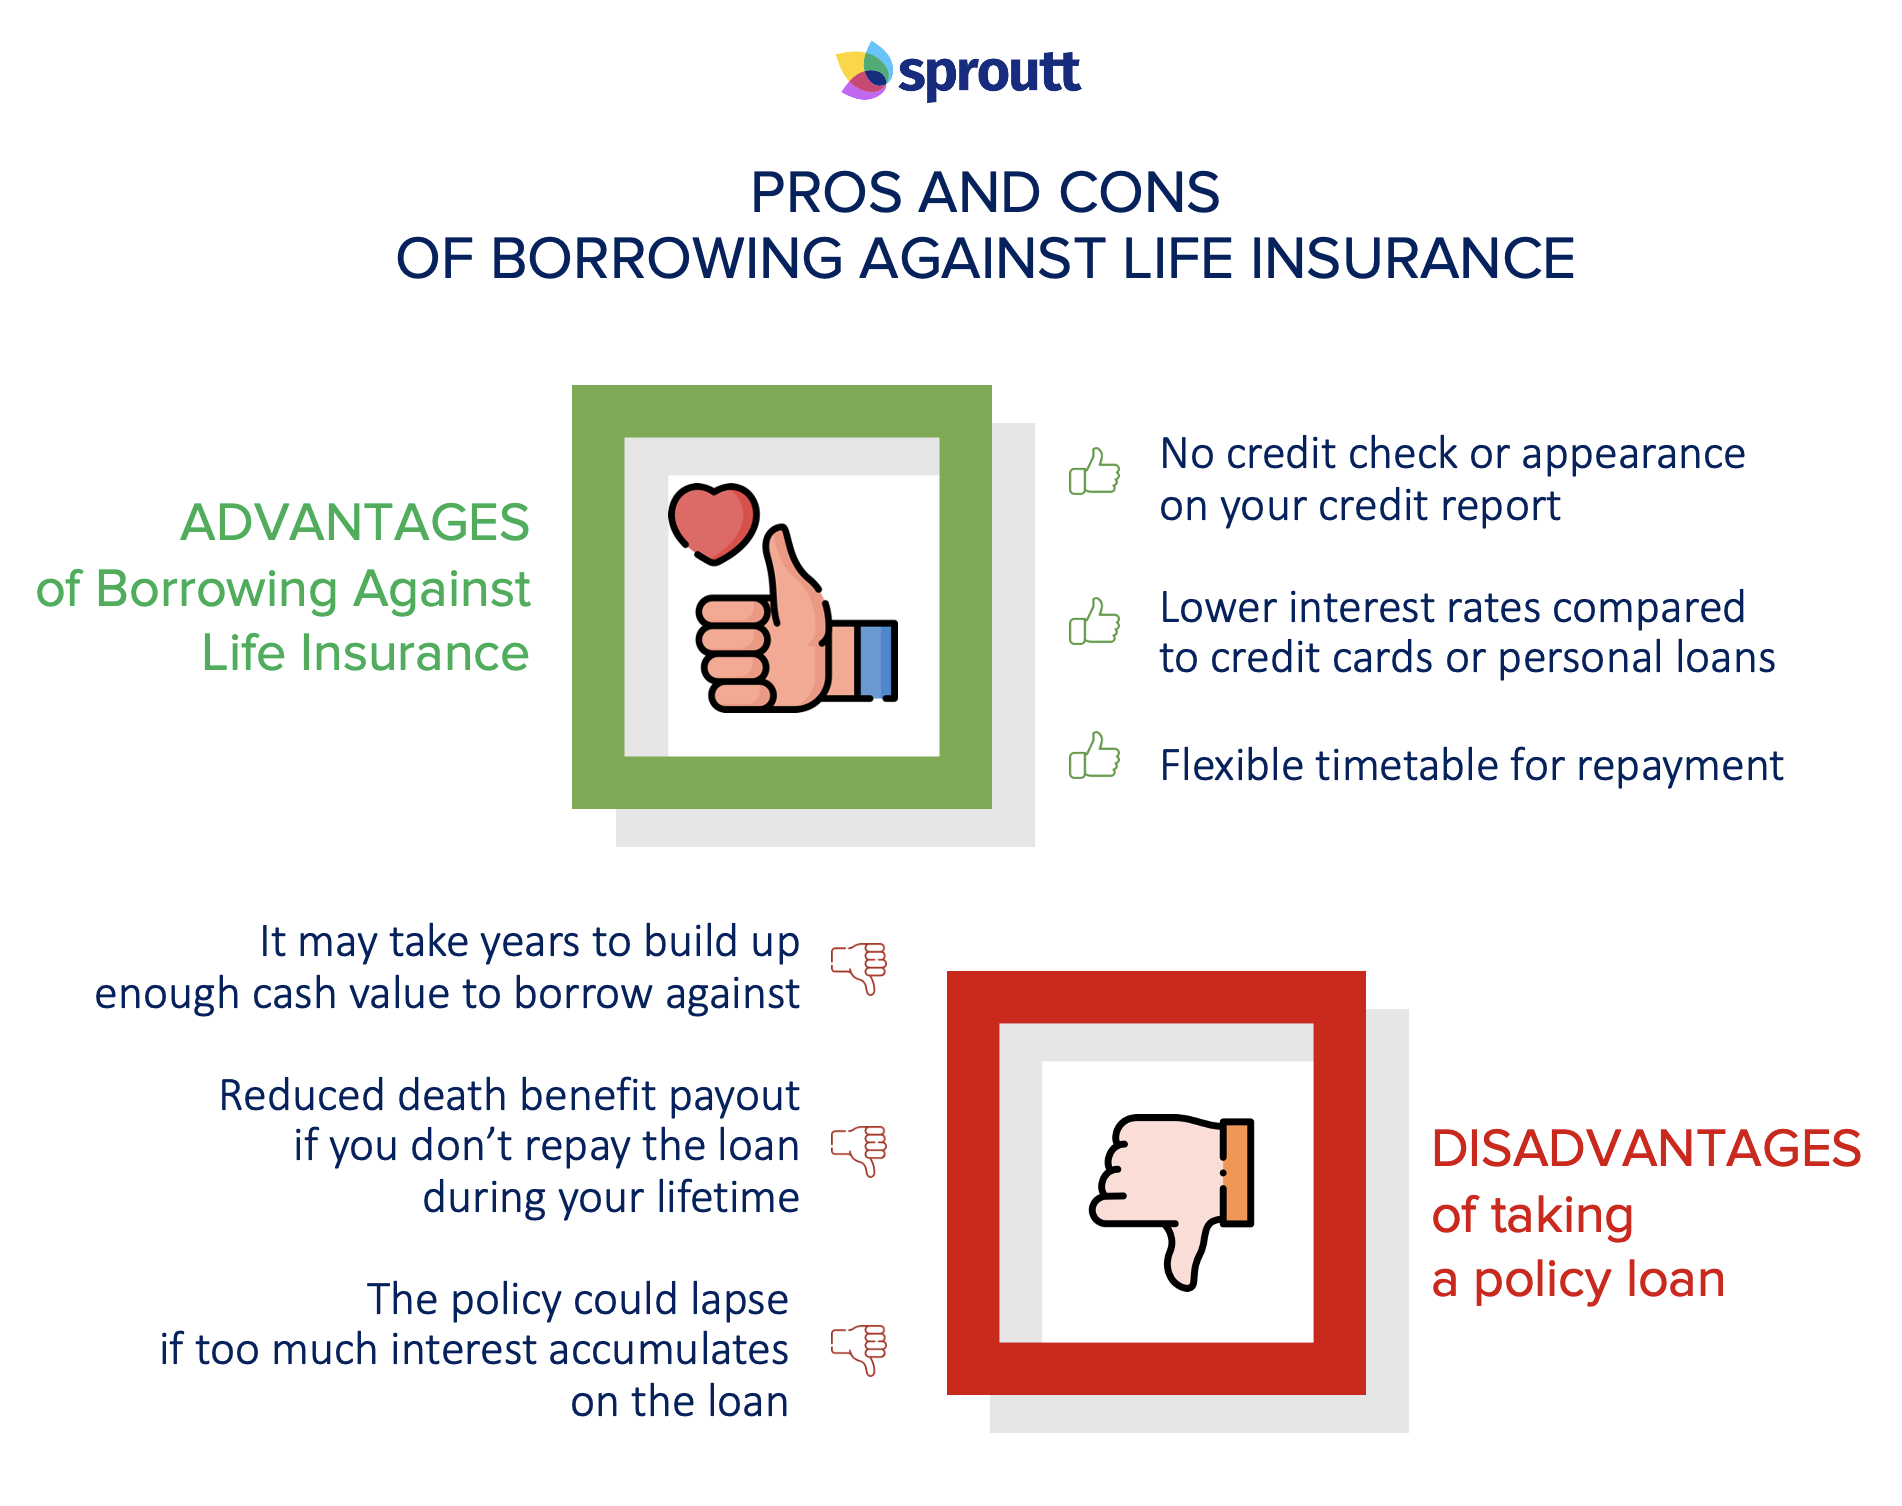 Borrowing Against Term Life Insurance Pros and Cons.jpg